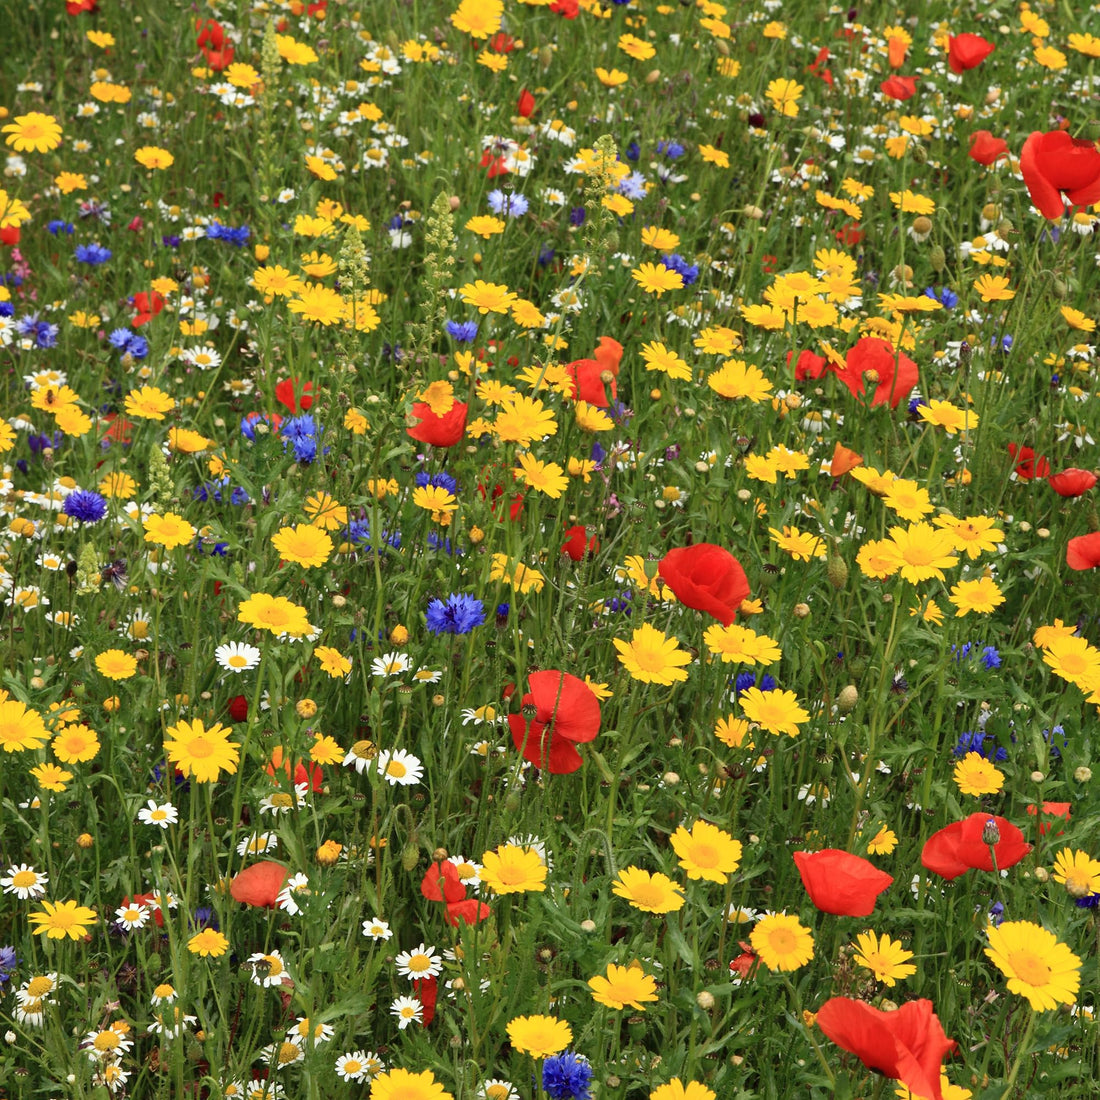 Harmonious Haven Flower Seeds For Planting: Hedgerow Wildflower Mix - Cultivate Serenity with a Diverse Garden of Native Blooms